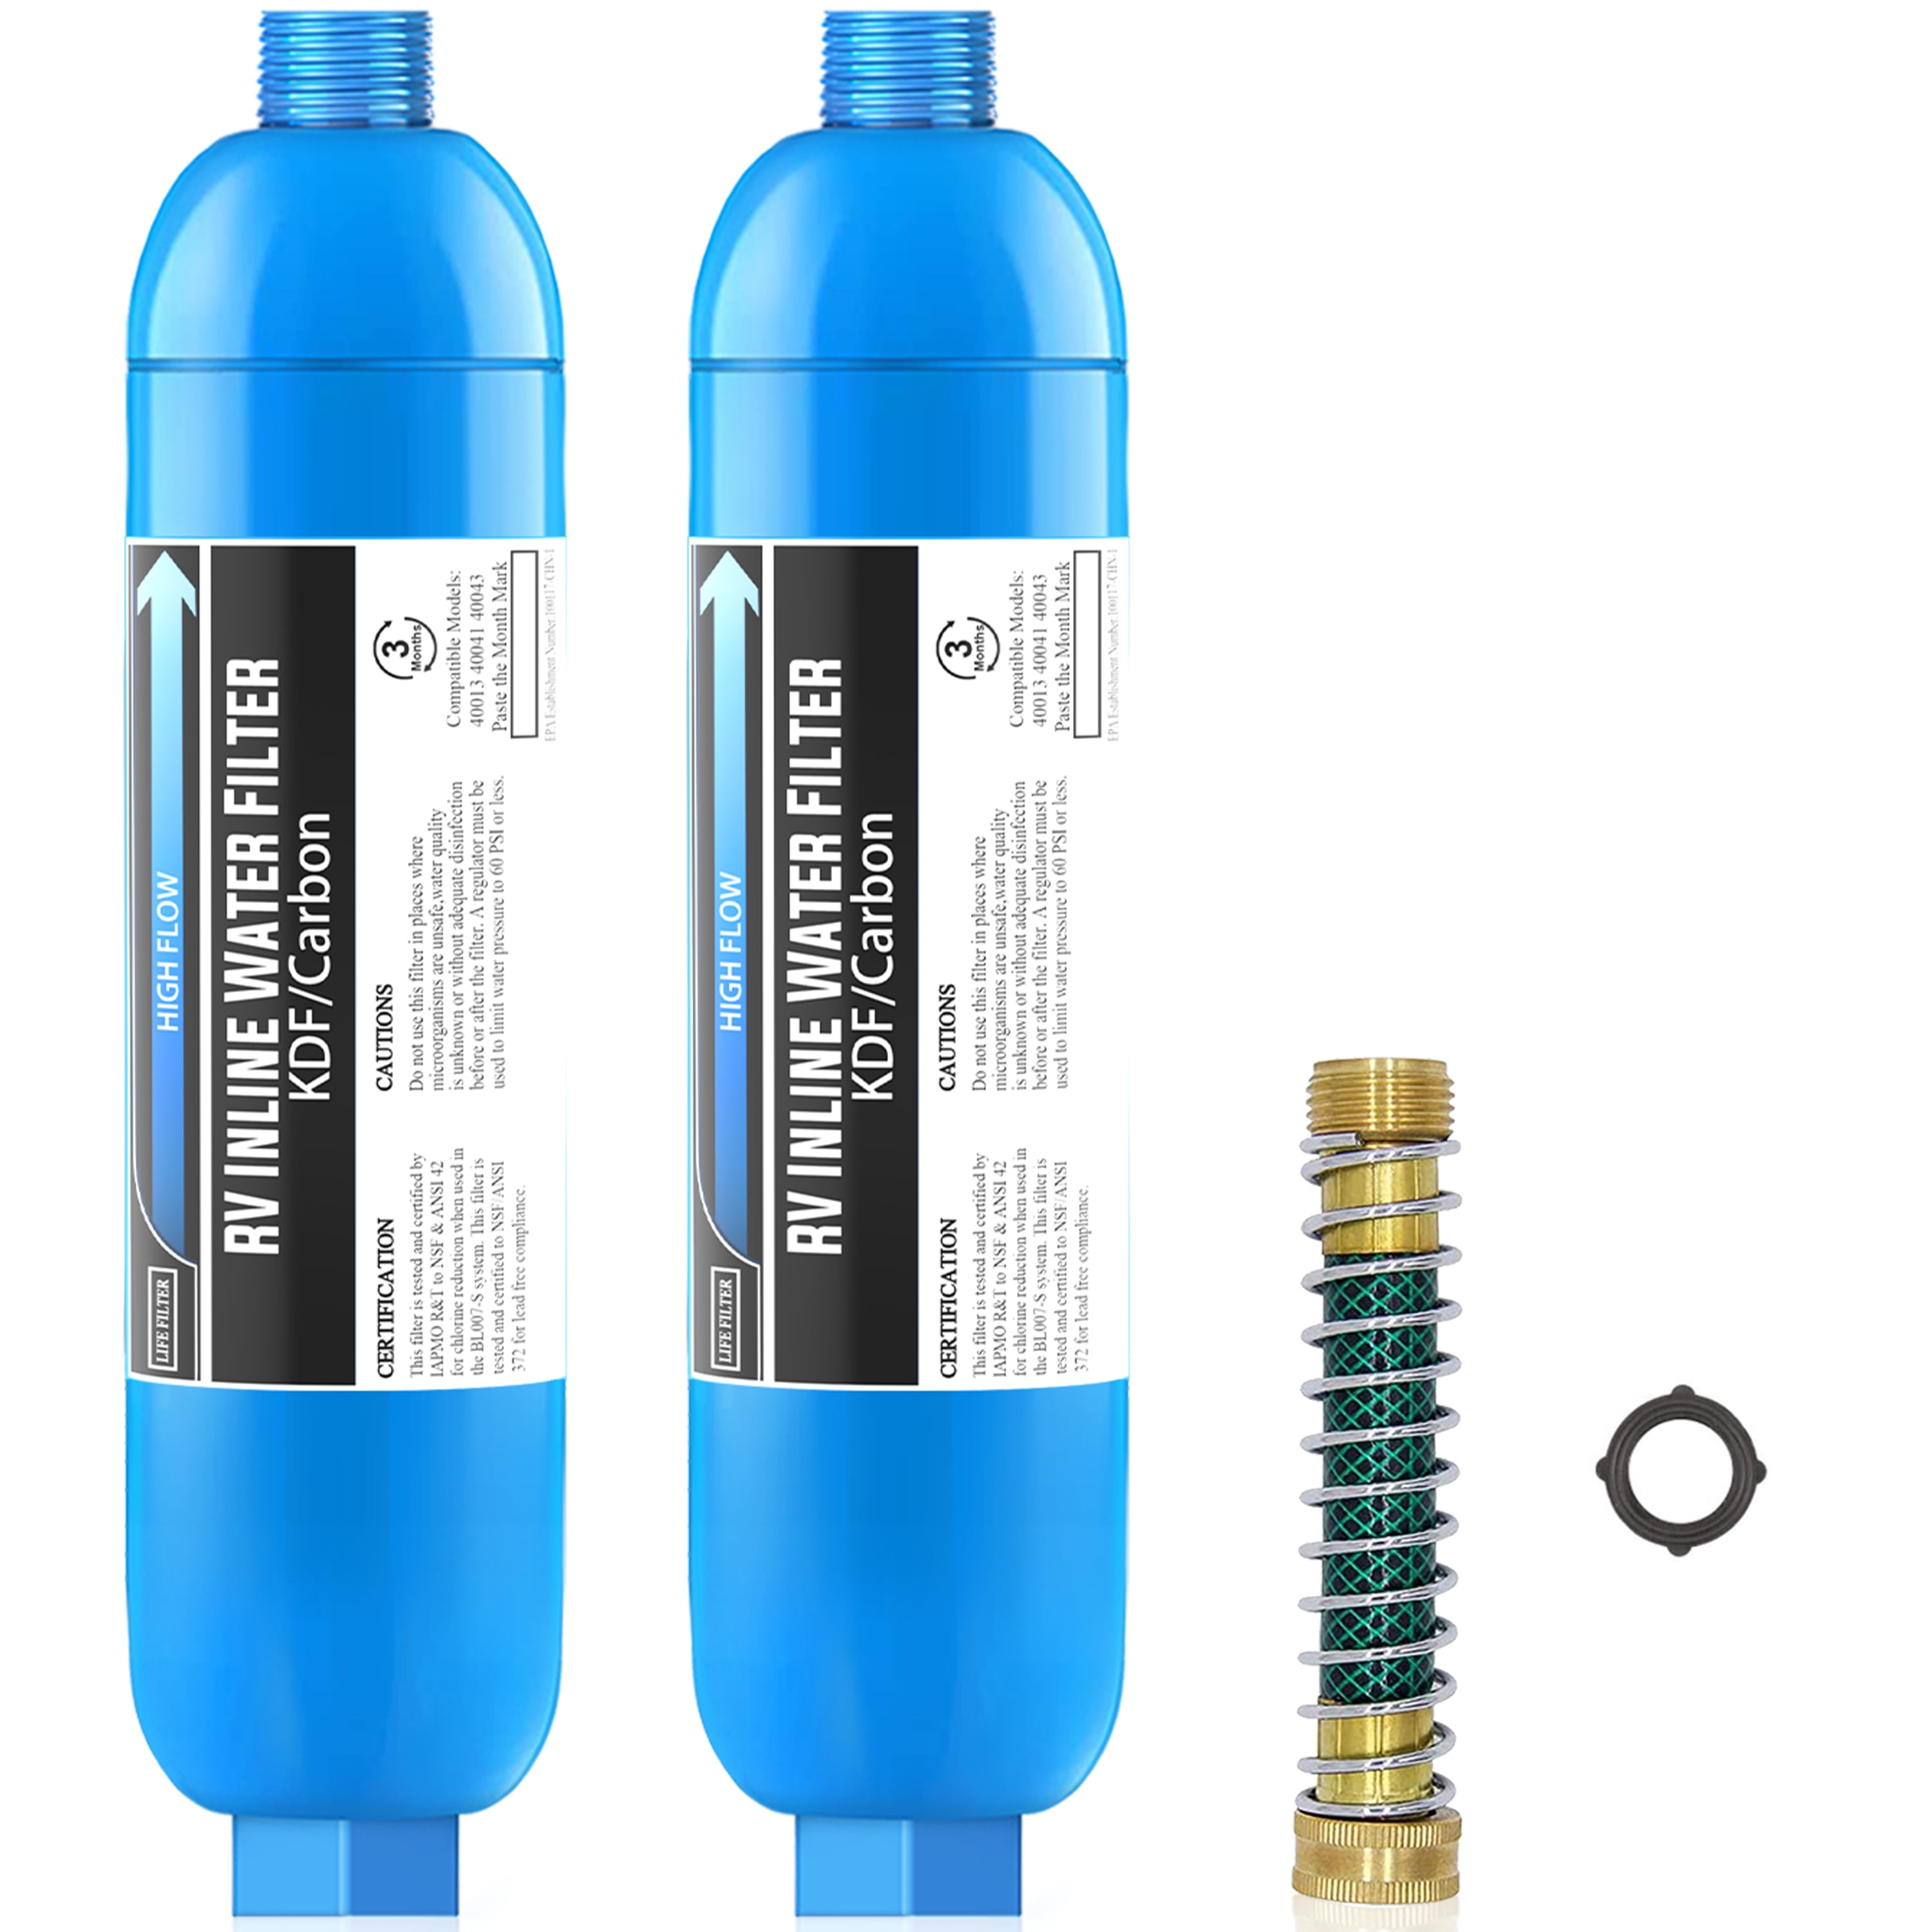 Inline Water Filter with Hose Protector - AQUACREST RV2+S